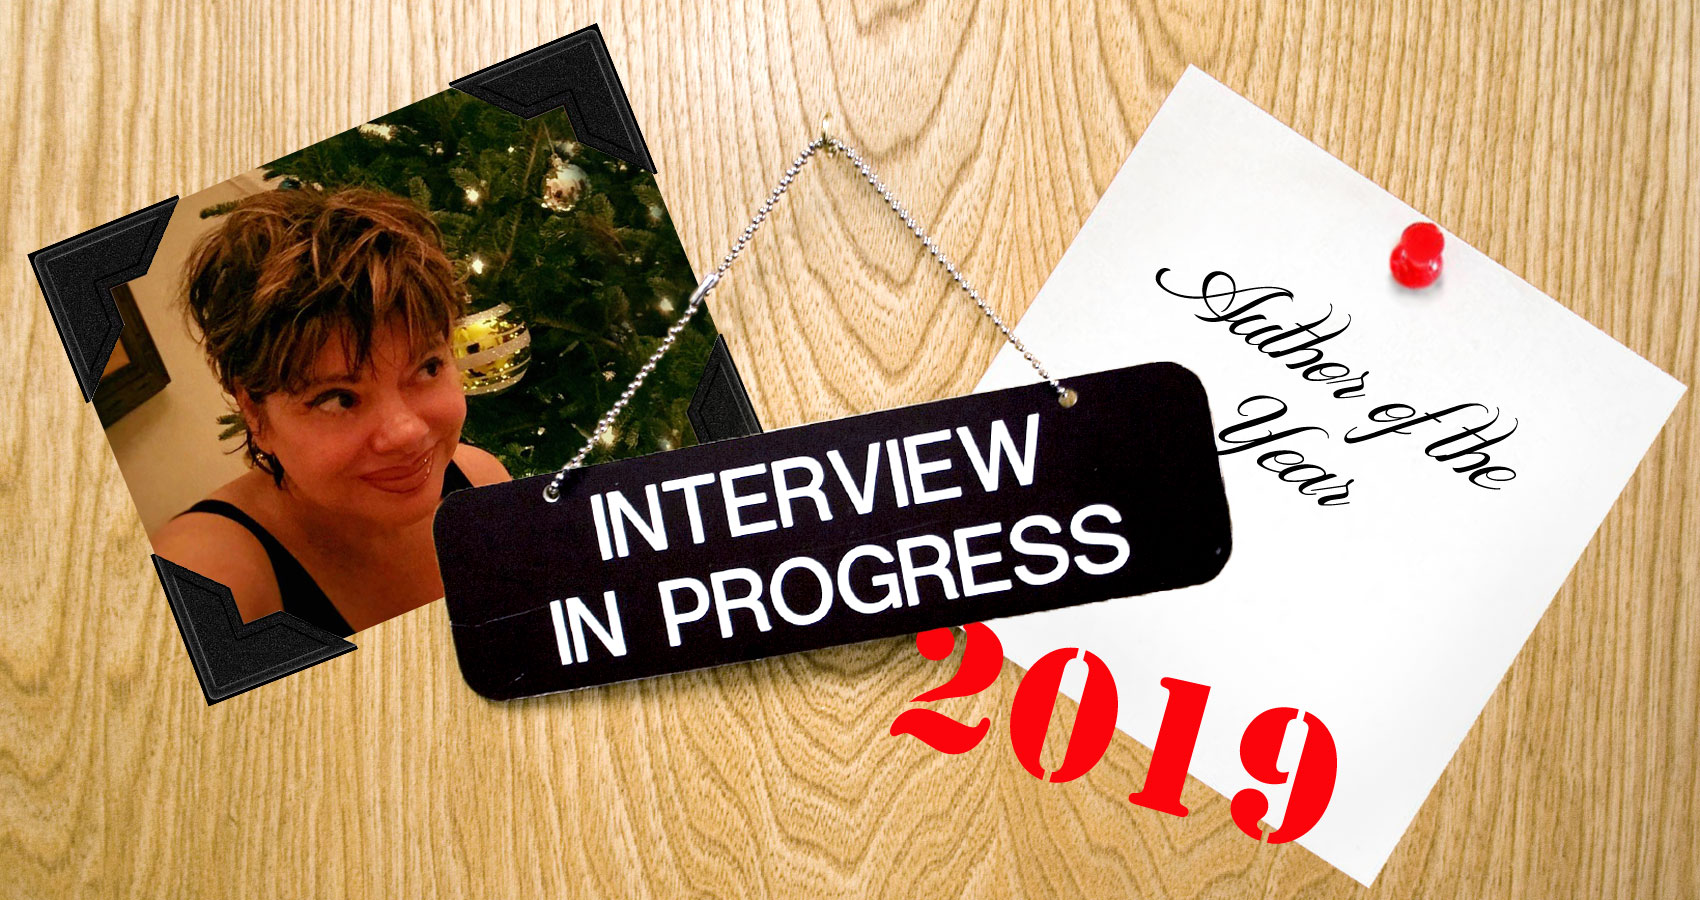 Author Of The Year 2019 Interview with Gabriela M